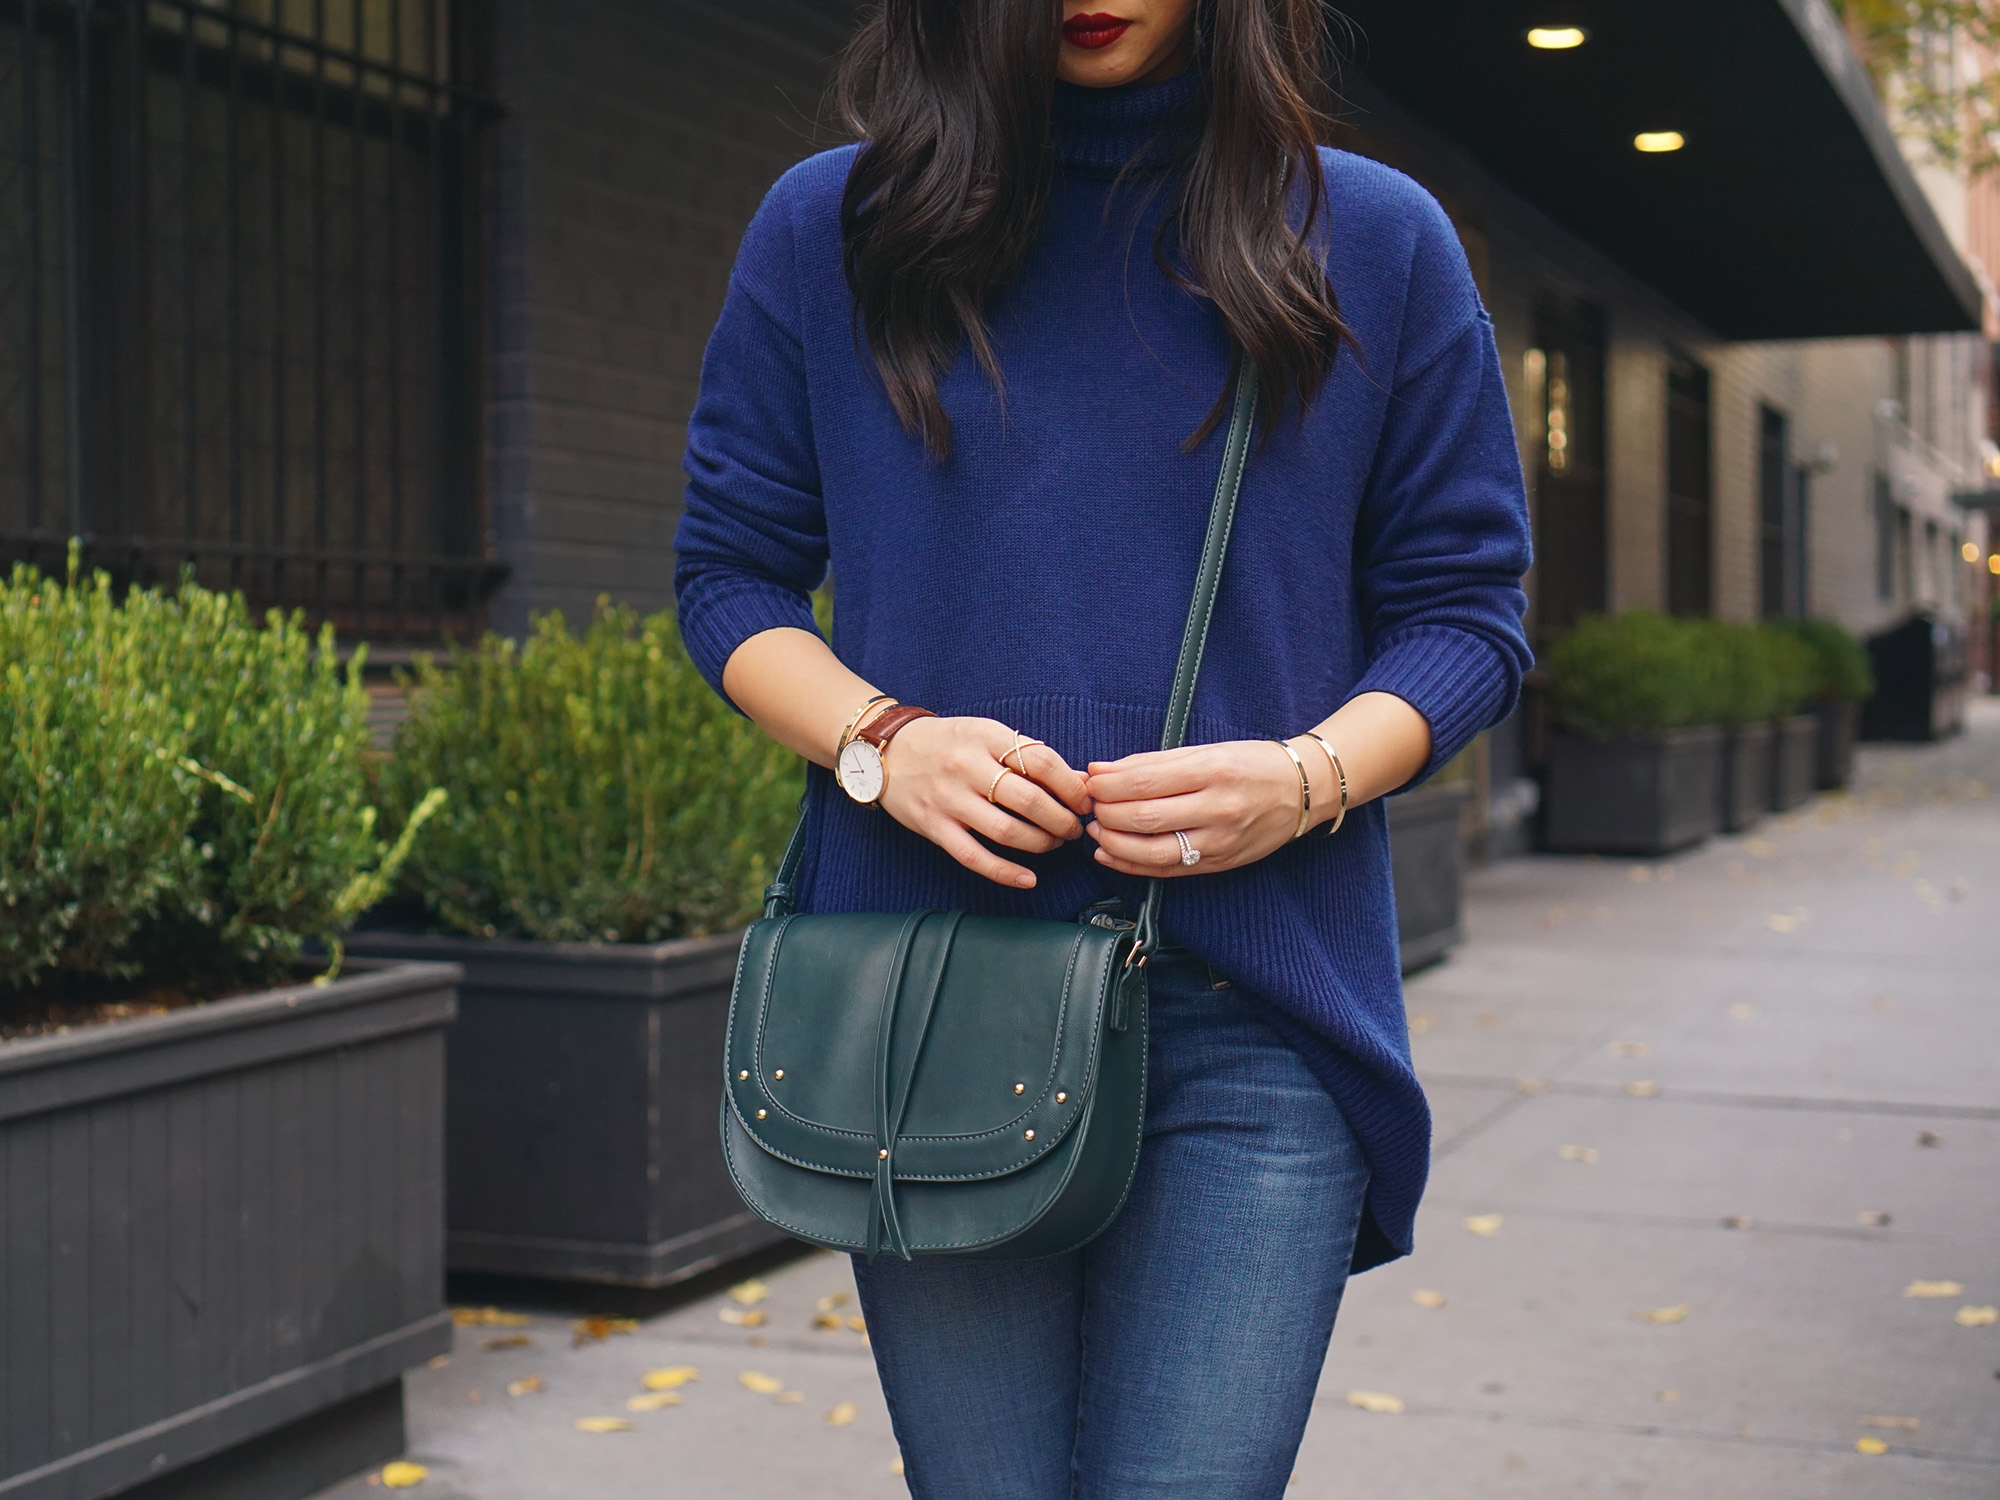 navy turtleneck outfit